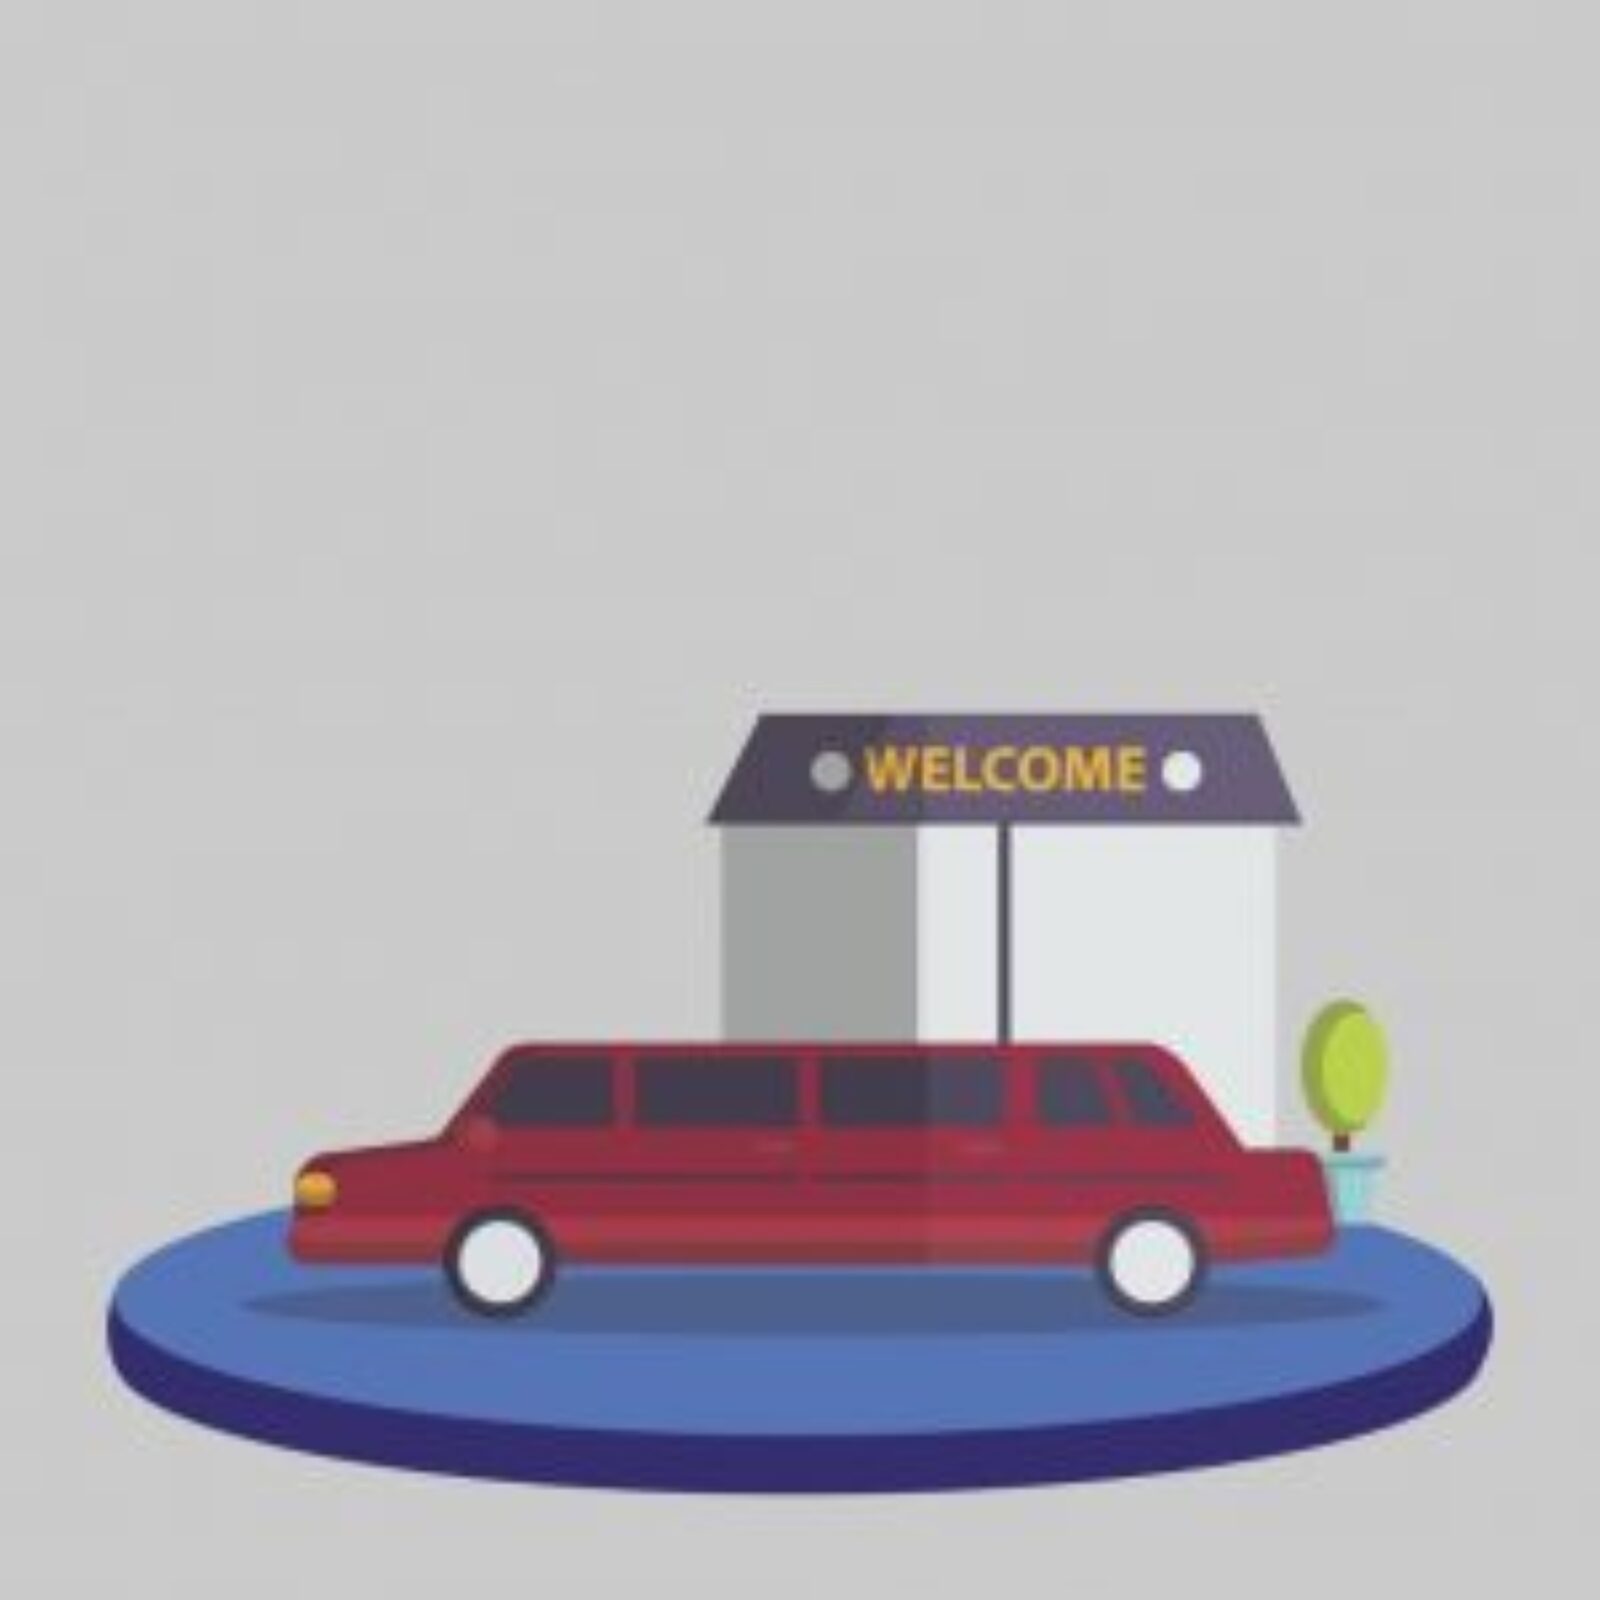 Search Marketing Priorities for Limousine Companies